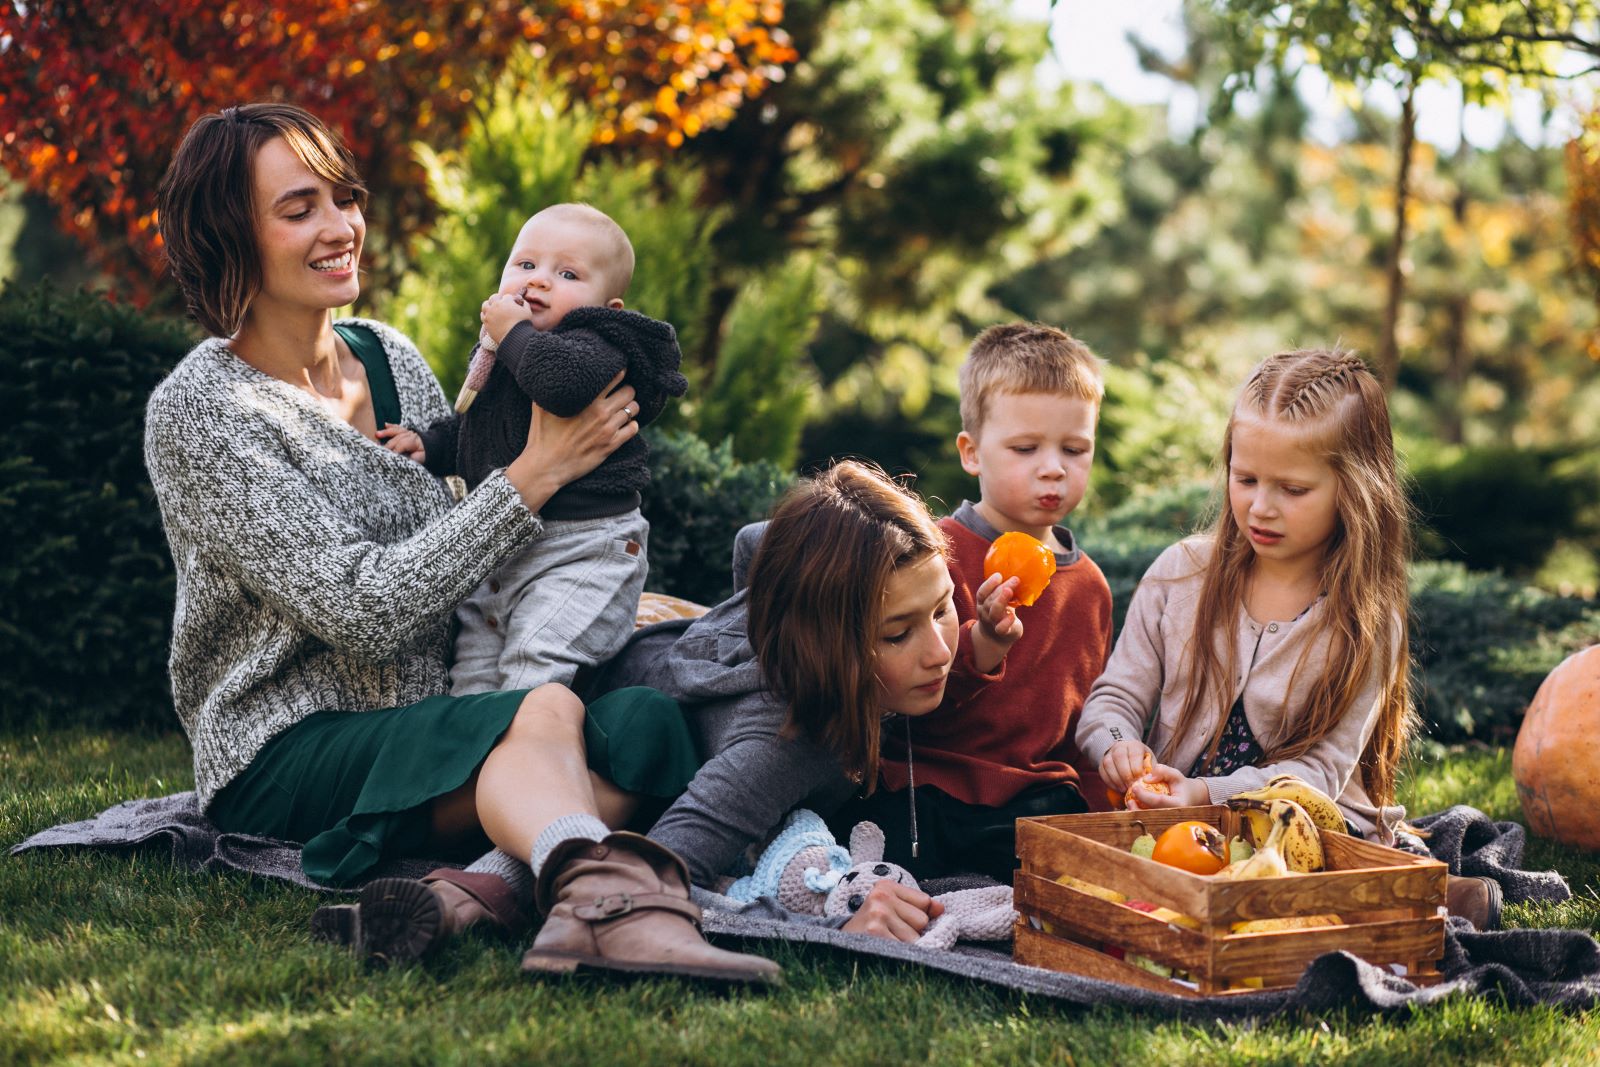 Image Credit: Shutterstock / PH888 <p><span>The traditional family structure is becoming less common. Many mothers are raising kids in single-parent households or blended families, facing unique financial and emotional pressures without consistent support.</span></p>